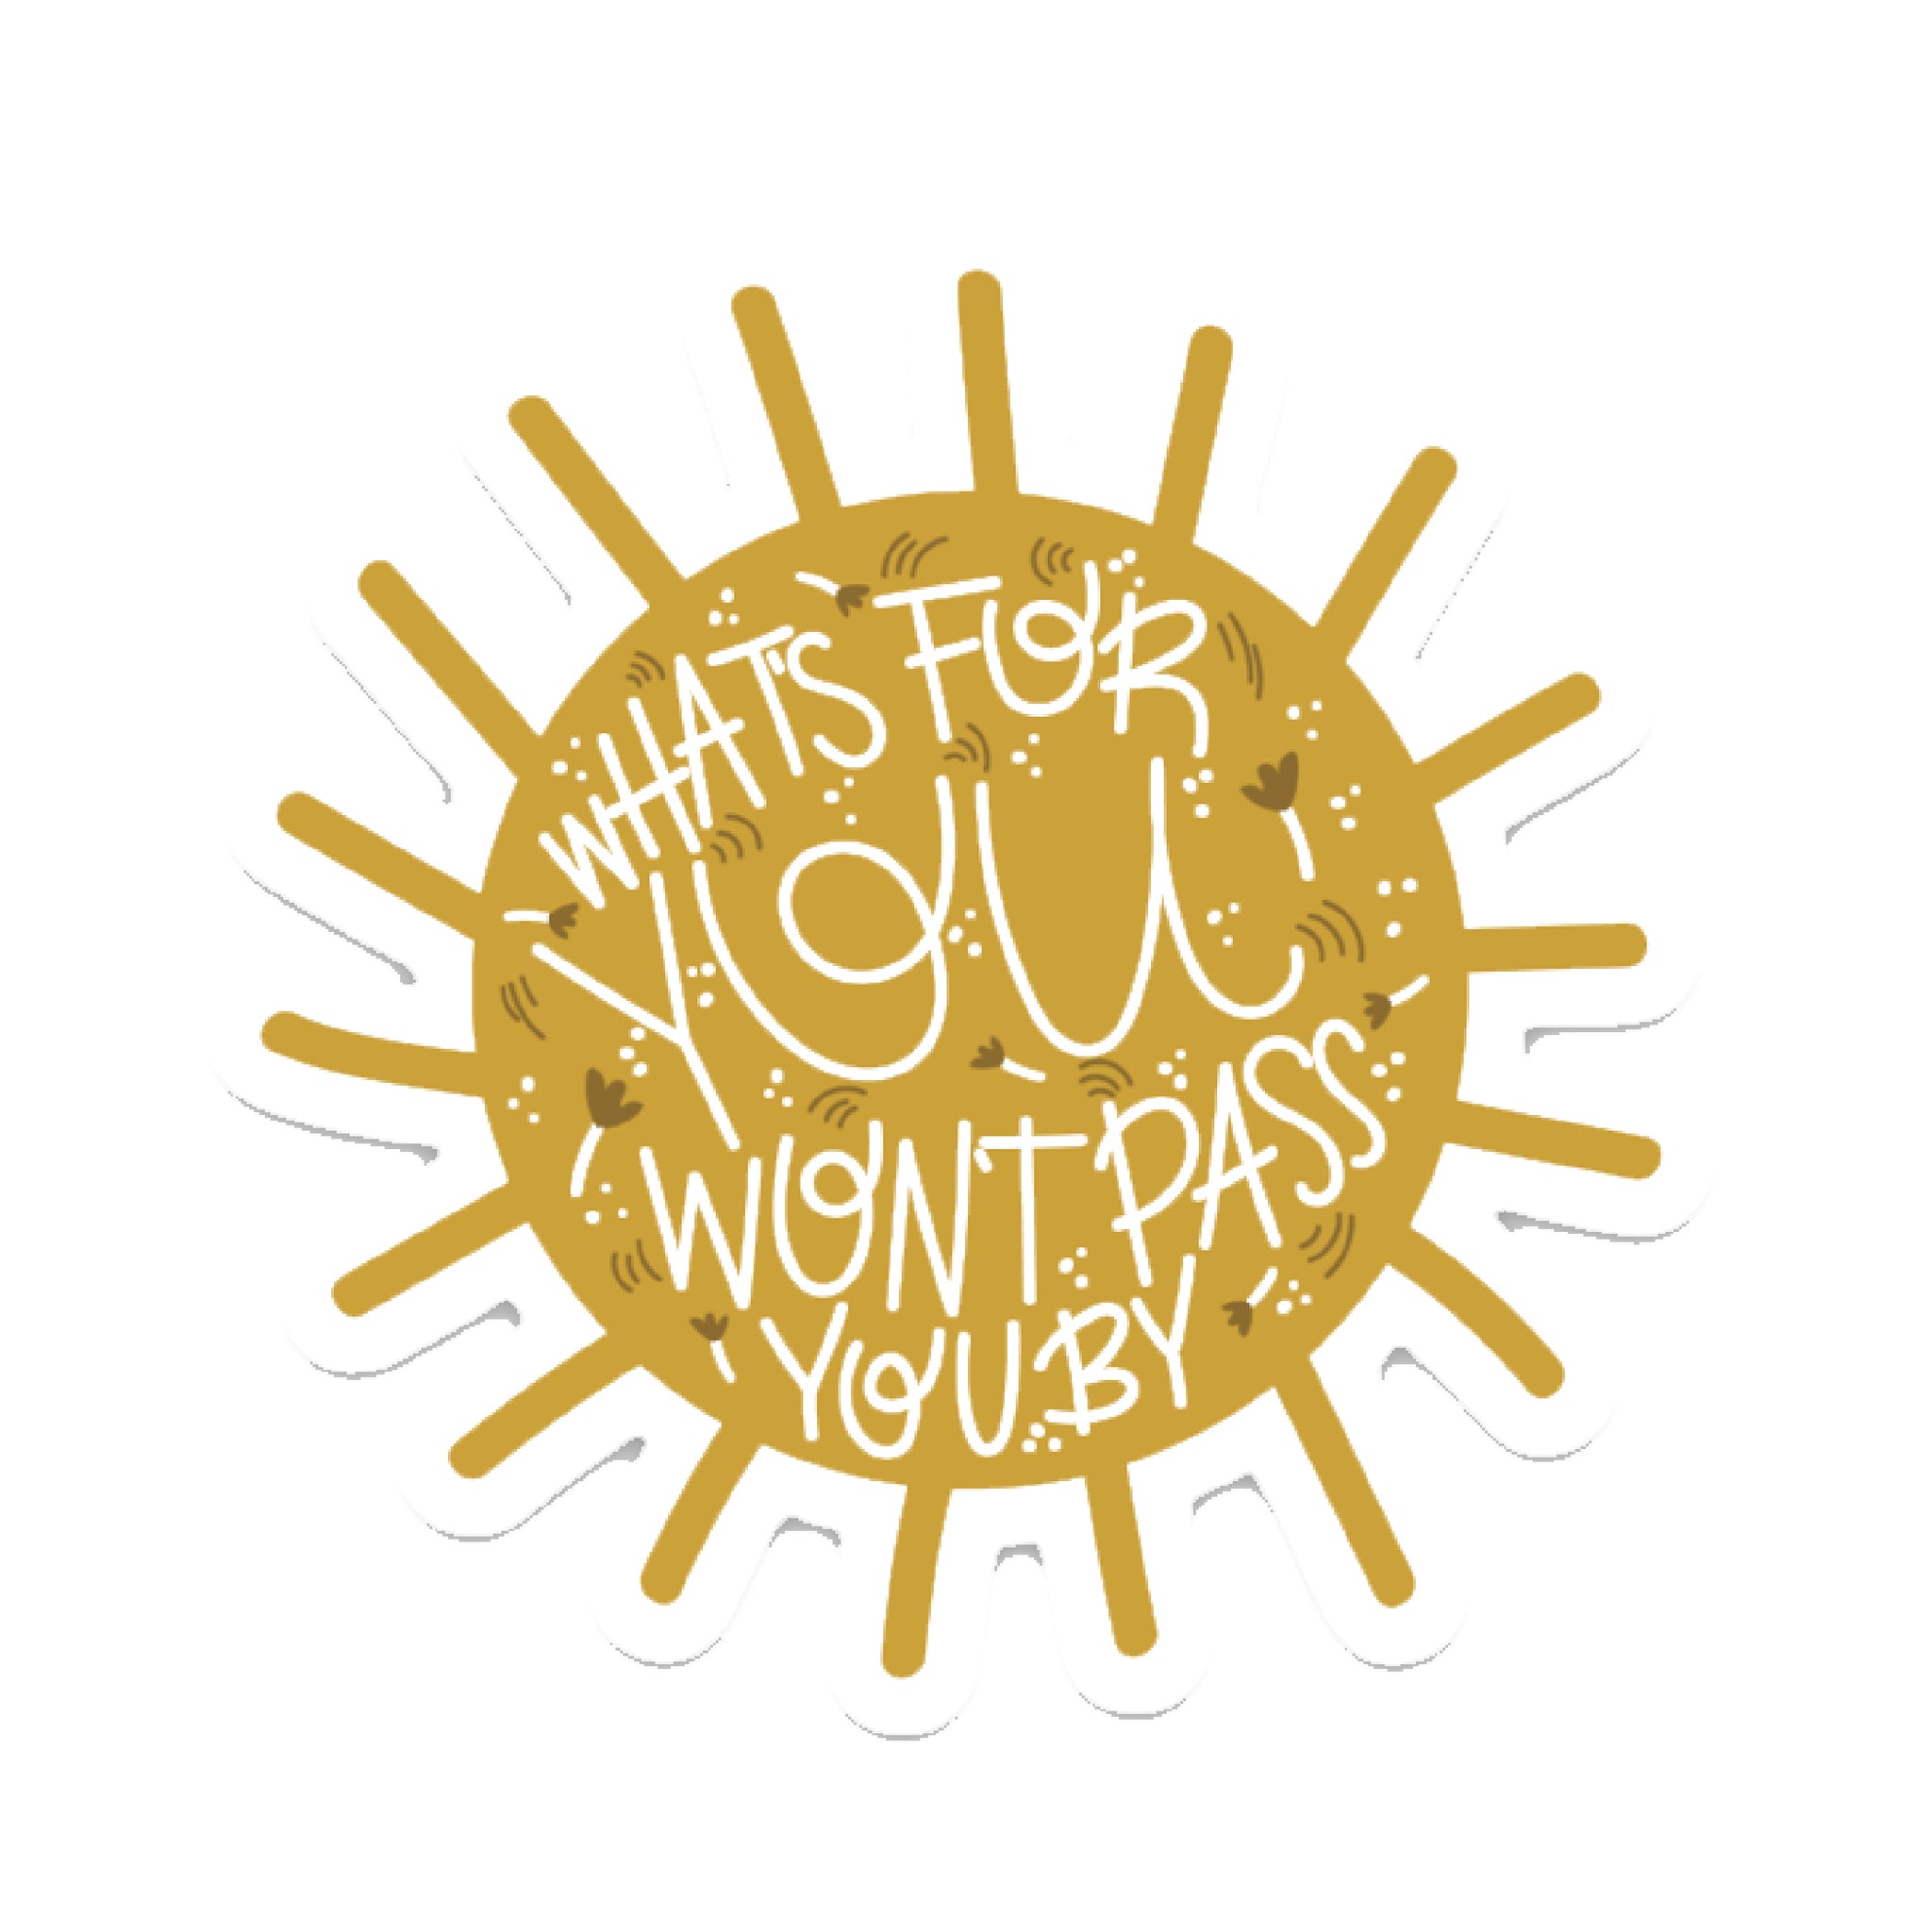 What’s For You Won’t Pass You By Sticker